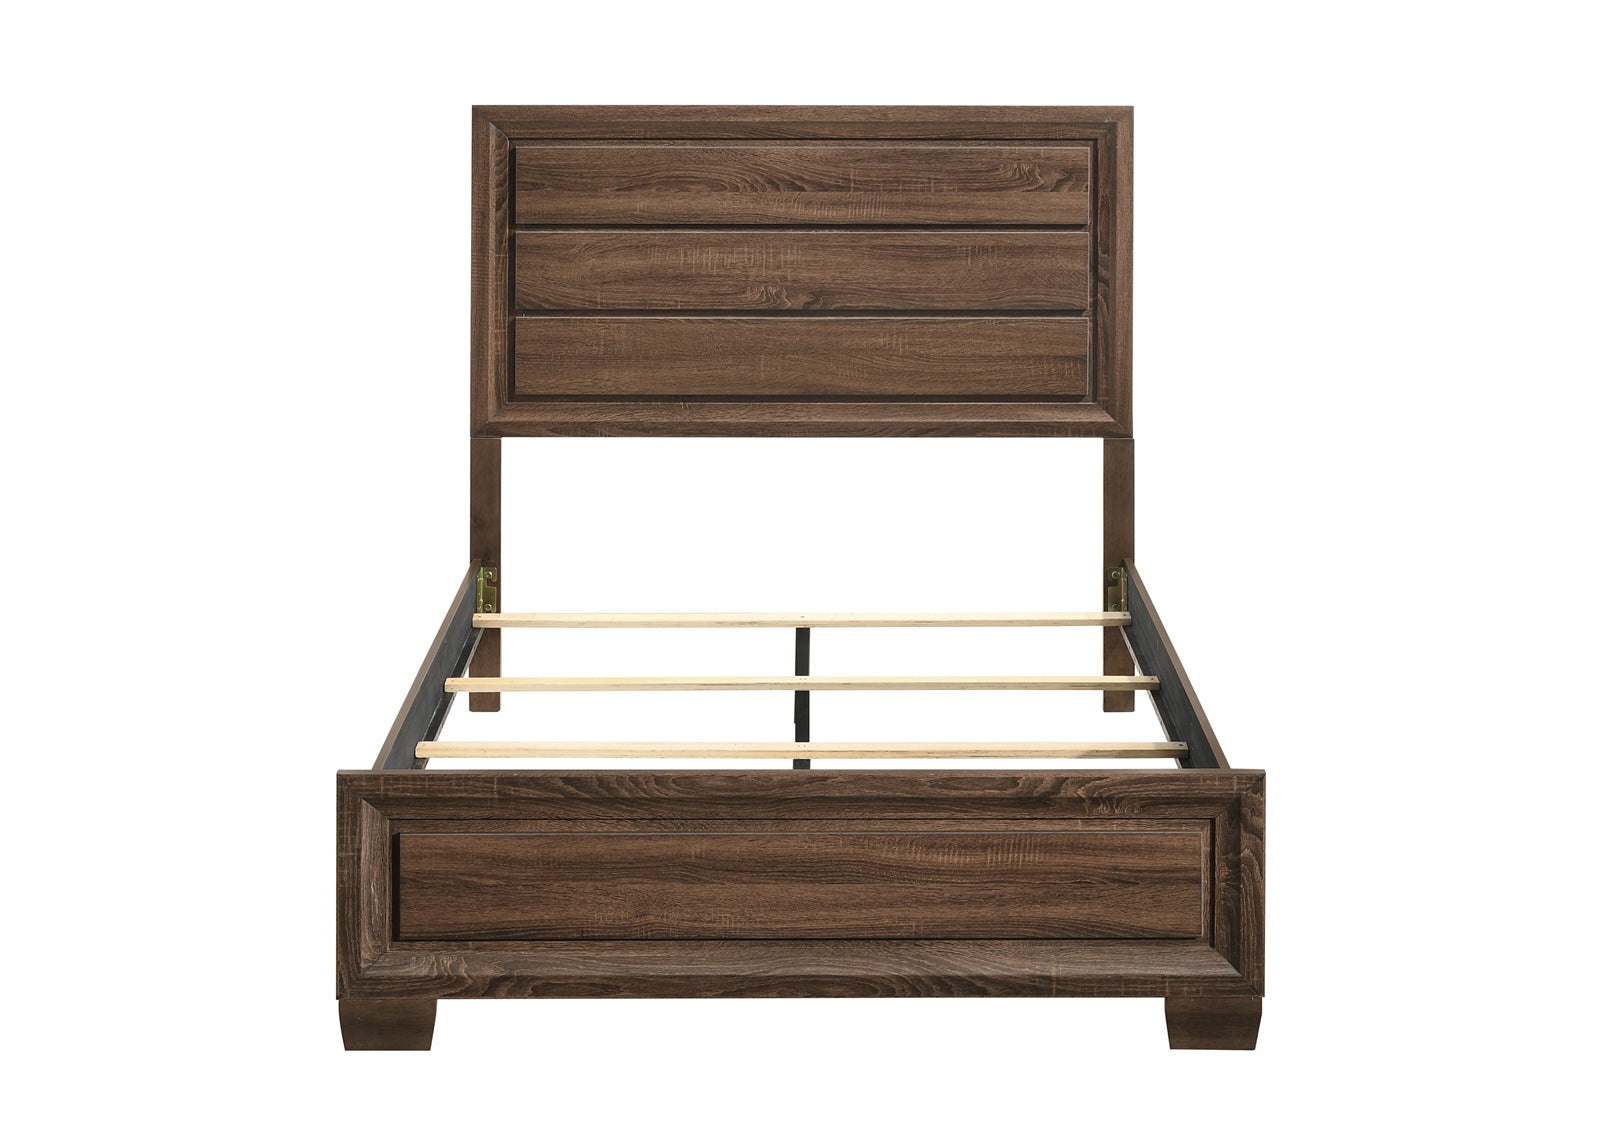 Ingrid Transitional Style Bed in Medium Brown